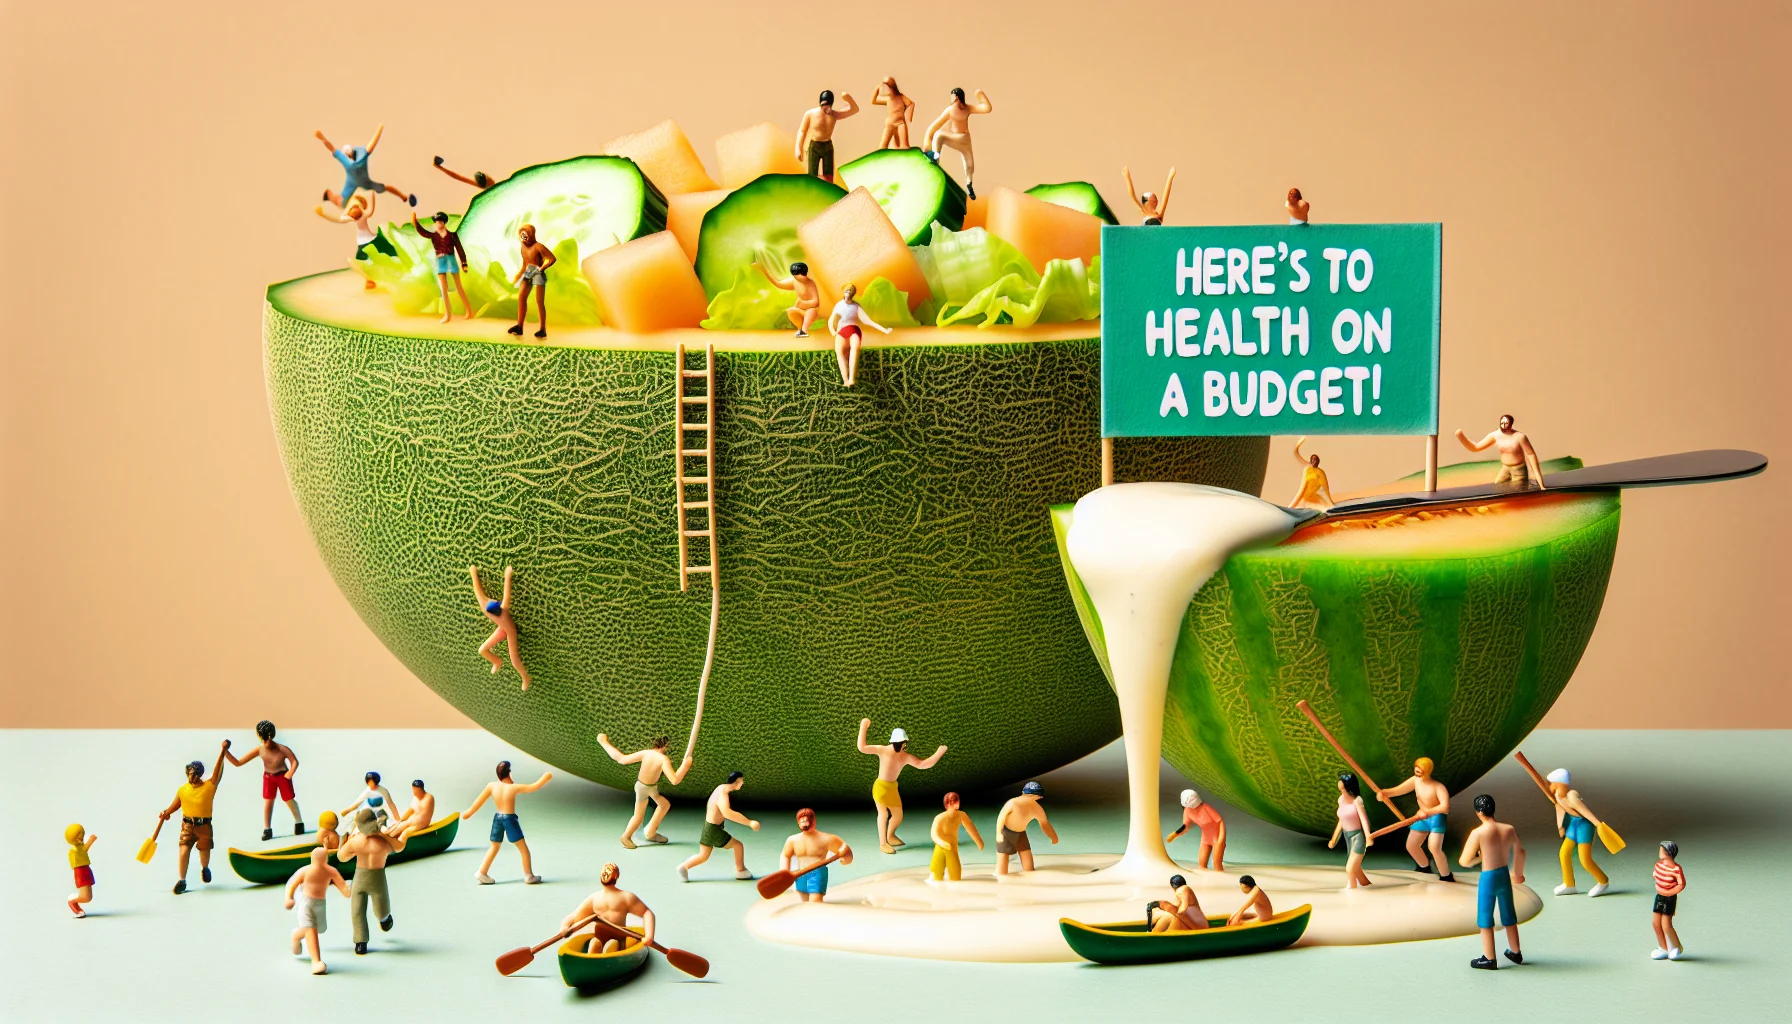 Create an imaginative scene showcasing a refreshing Melon Salad Side Dish. In this humorous scenario, let's have the melon halves positioned as if they're paddling a canoe on a refreshing river made of salad dressing. A diverse group of tiny, comically-stylized human figures of different descents and genders should interact with the salad, some climbing on the melon halves, others swimming in the dressing river, and even some diving from a high cucumber cliff. A large banner hangs in the background reading 'Here's to health on a budget!', reinforcing the idea of enjoying healthy food for less money.